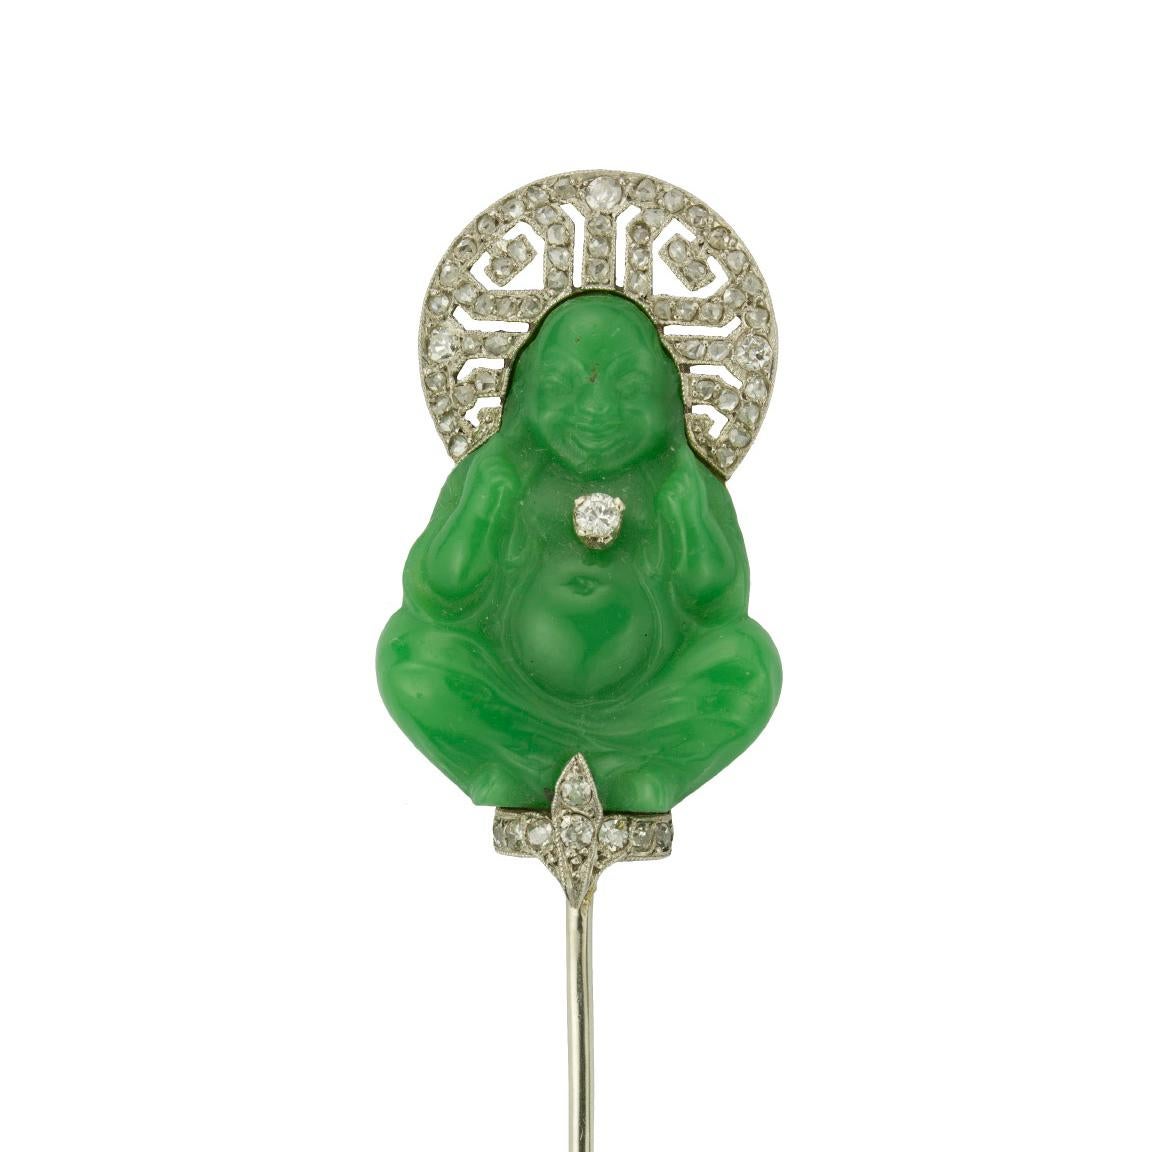 An Art Deco Buddha sureté pin, set with a green pâte de verre Buddha, resting upon a diamond fleur-de-lis pedestal, with a platinum hallo-shape crown and a single diamond pendant, all to a platinum and white gold mount, encrusted with rose-cut and